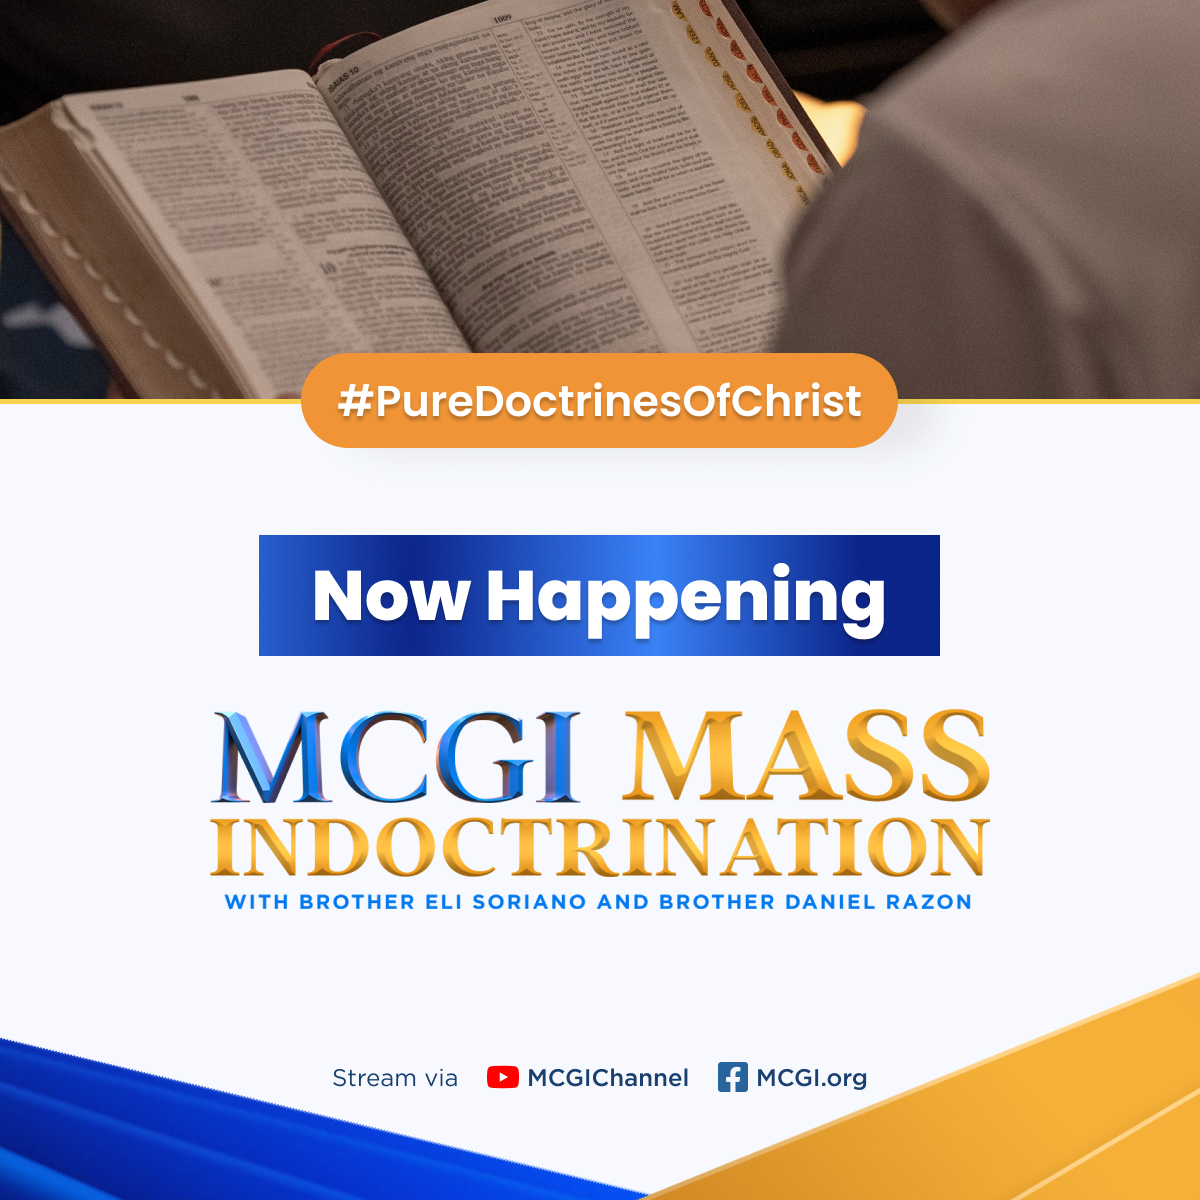 Our Mass Indoctrination has kicked off with a musical number by our MCGI Orchestra. Hop onto our livestream now to catch it.

How Should We Treat People
#PureDoctrinesOfChrist